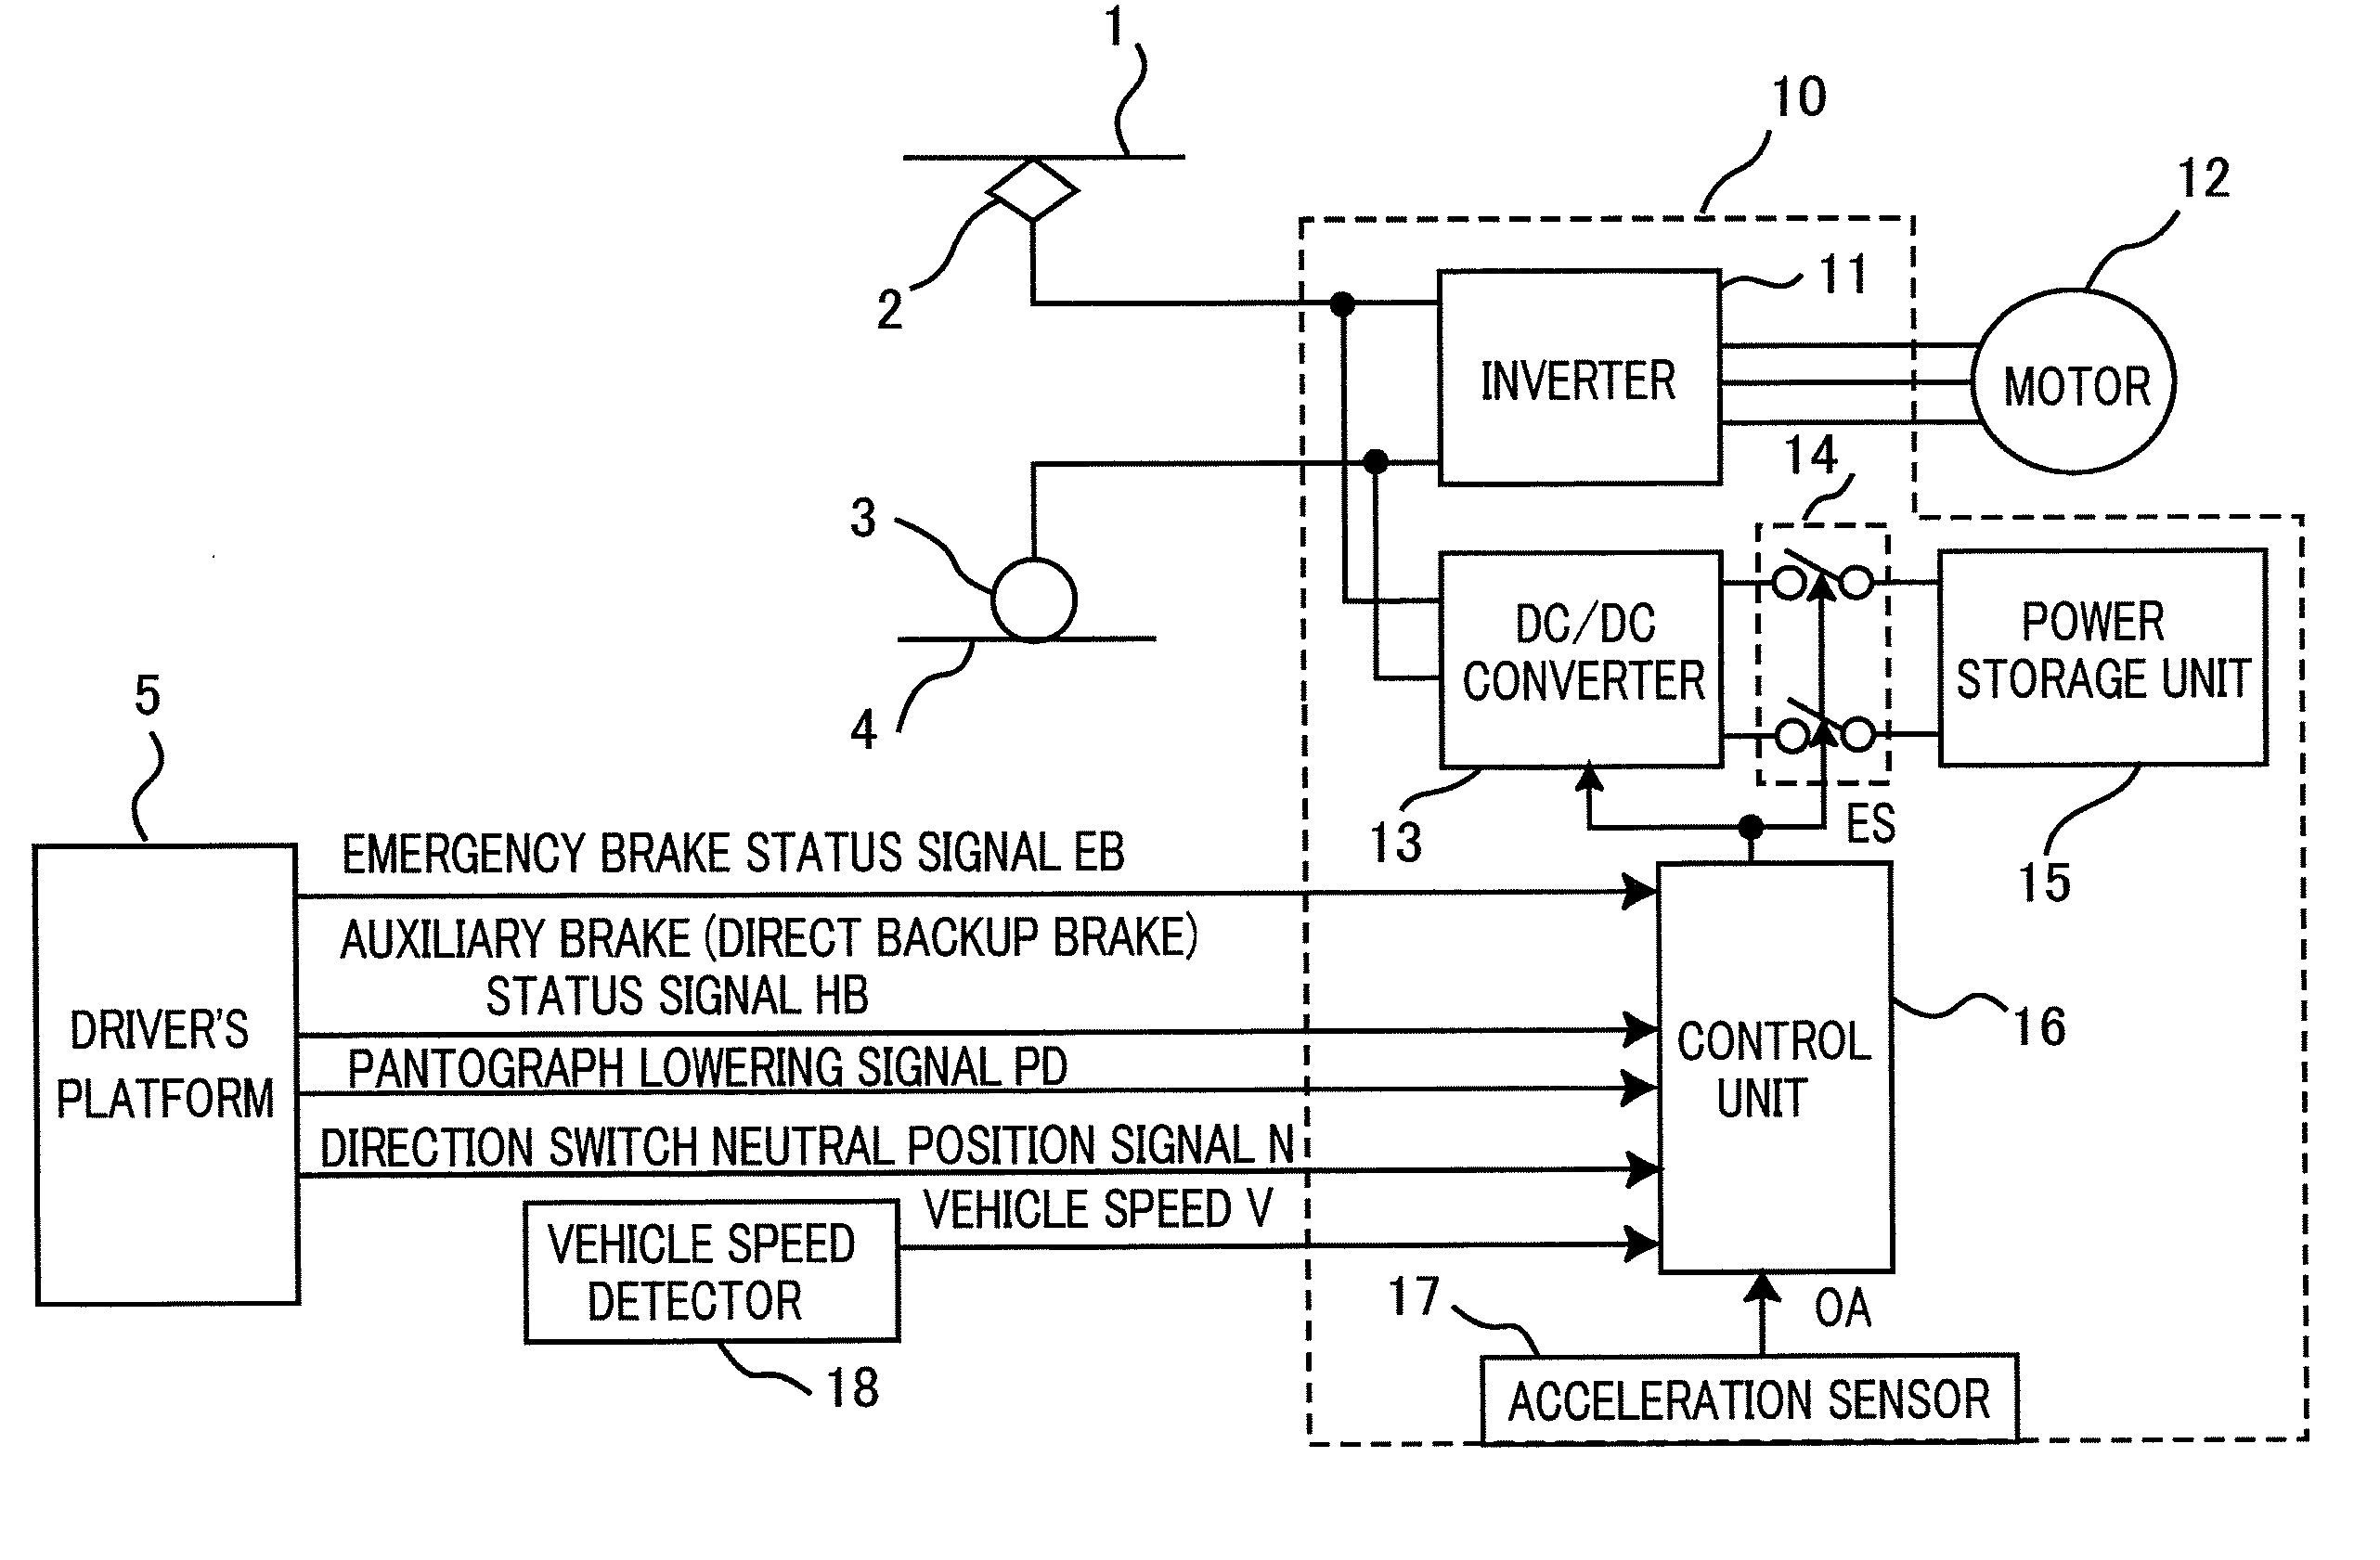 Electric-vehicle controller